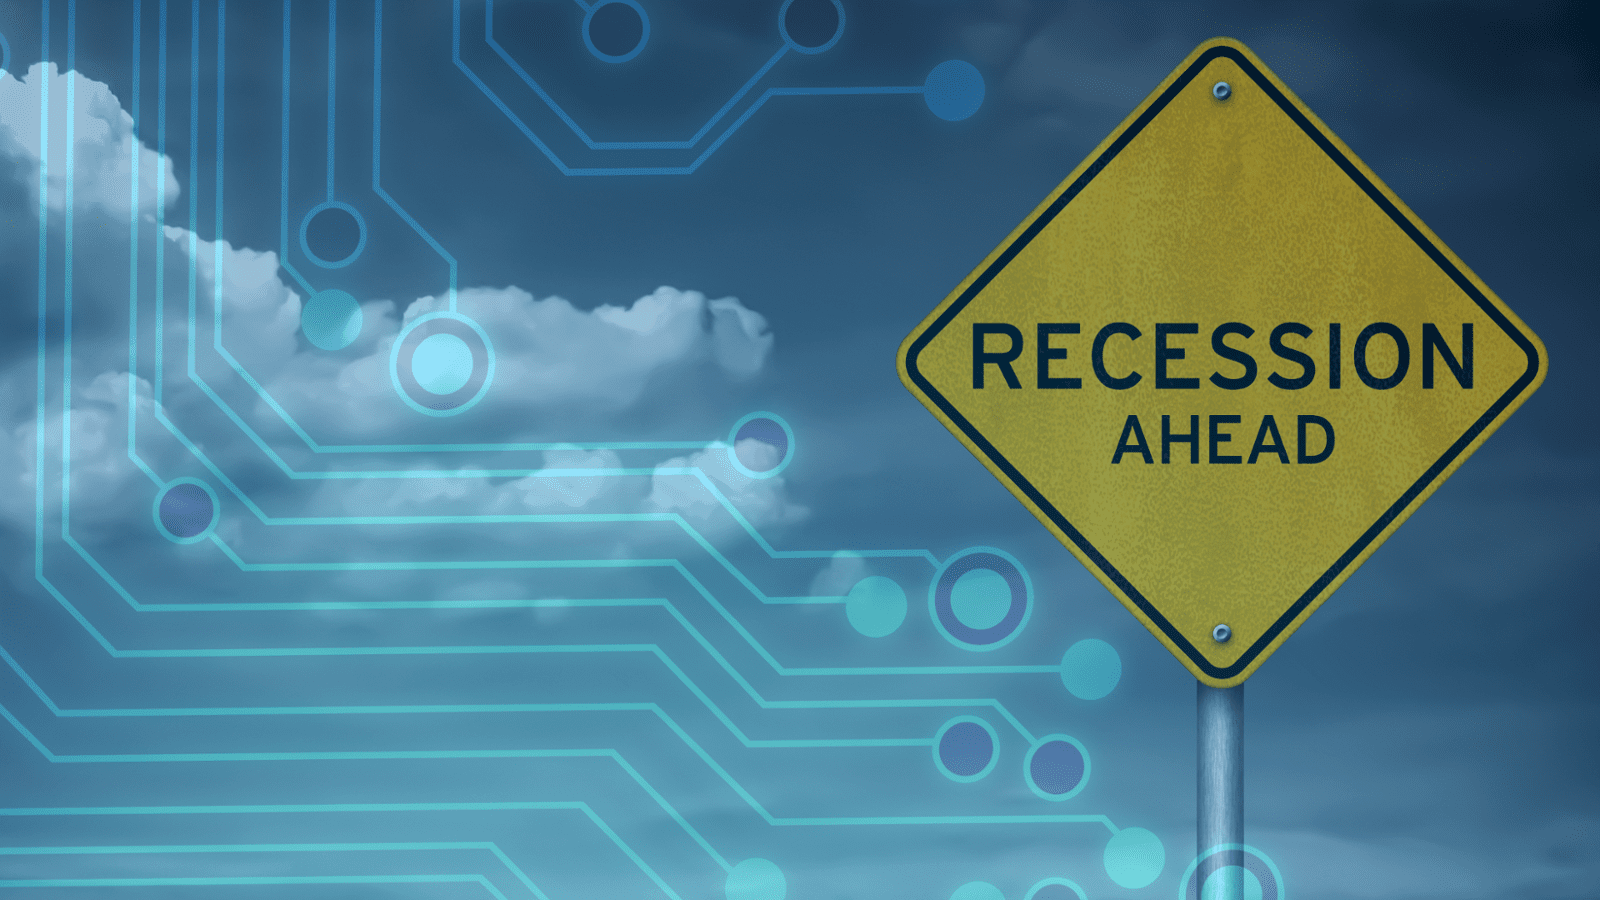 A recession is looming: time to re-evaluate your IT budget?